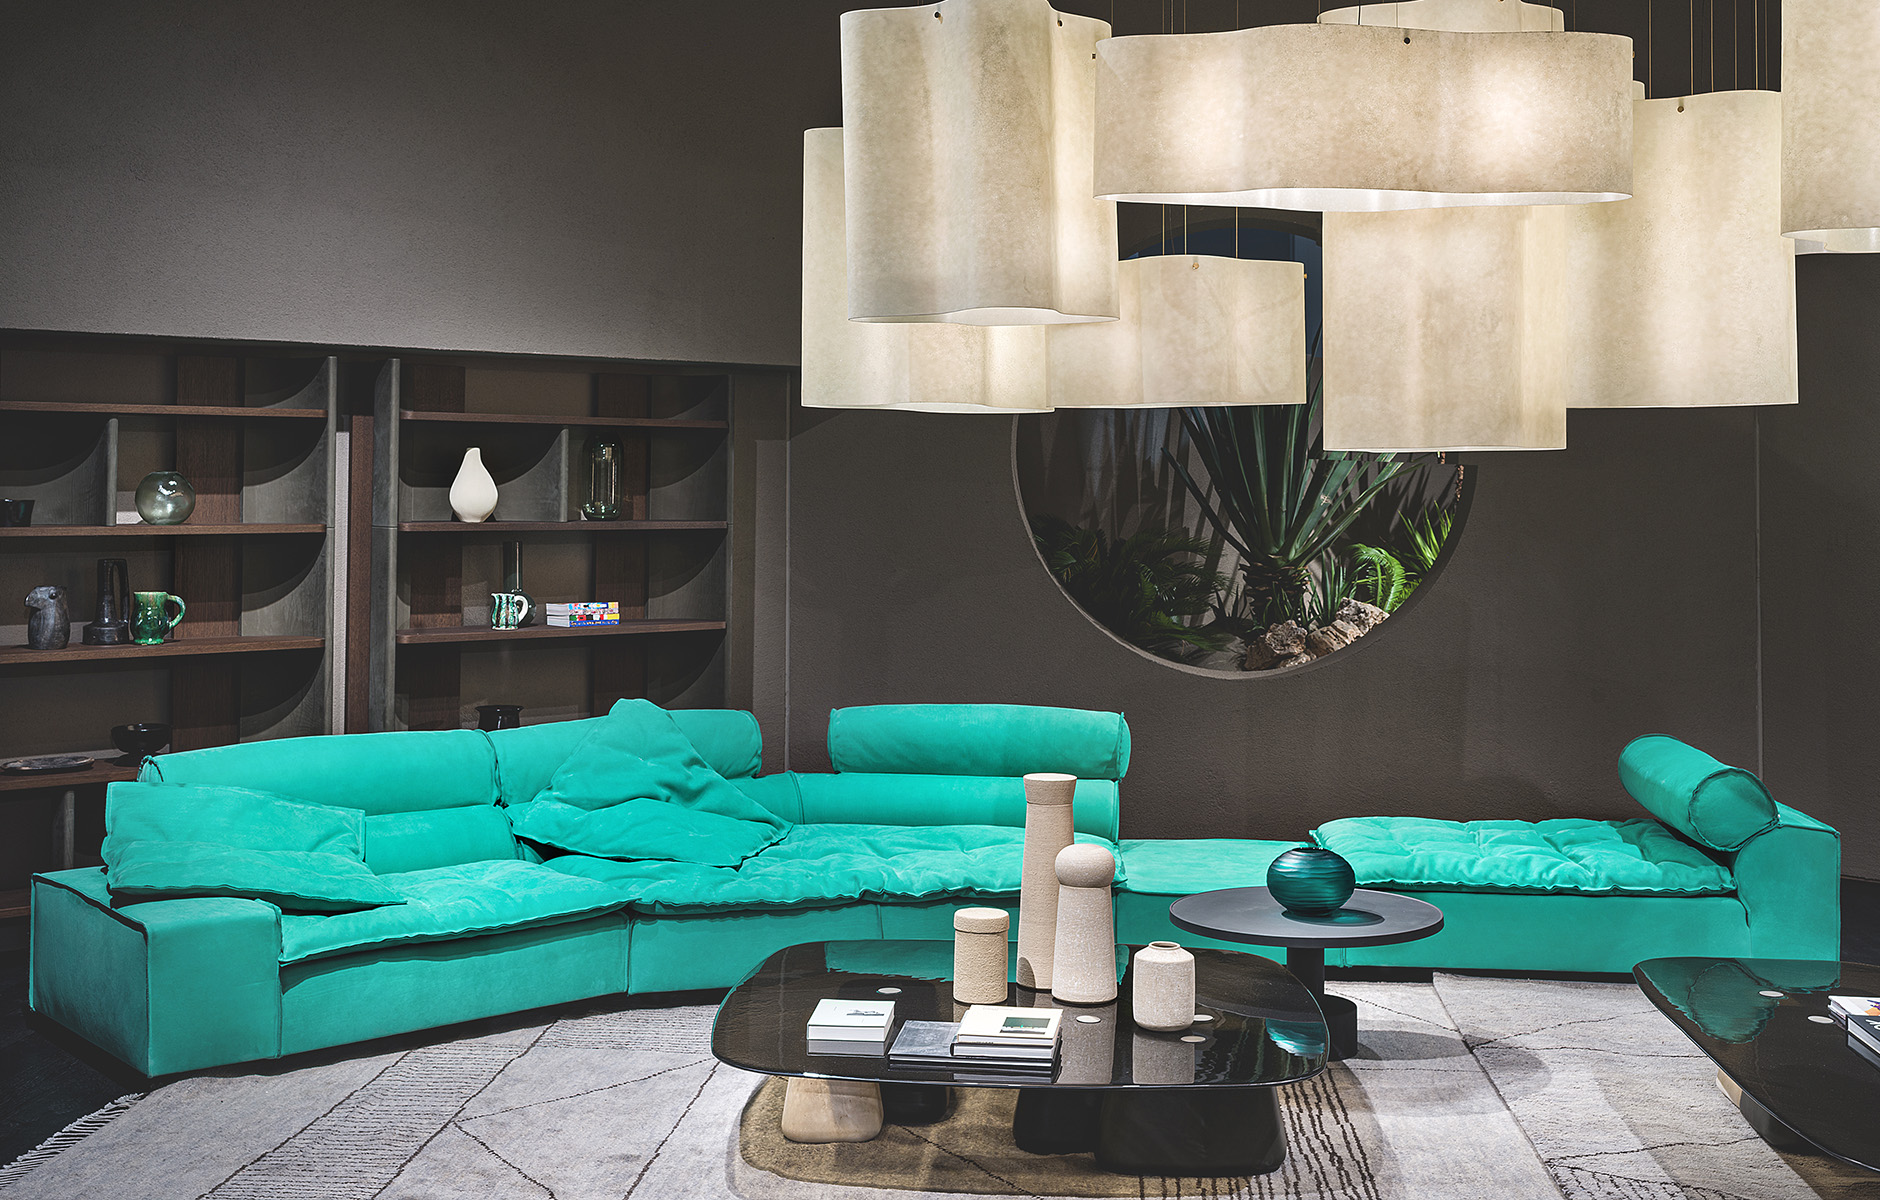 Paola Navone's super comfortable Miami Soft sofa for Baxter. Photo c/o Baxter.